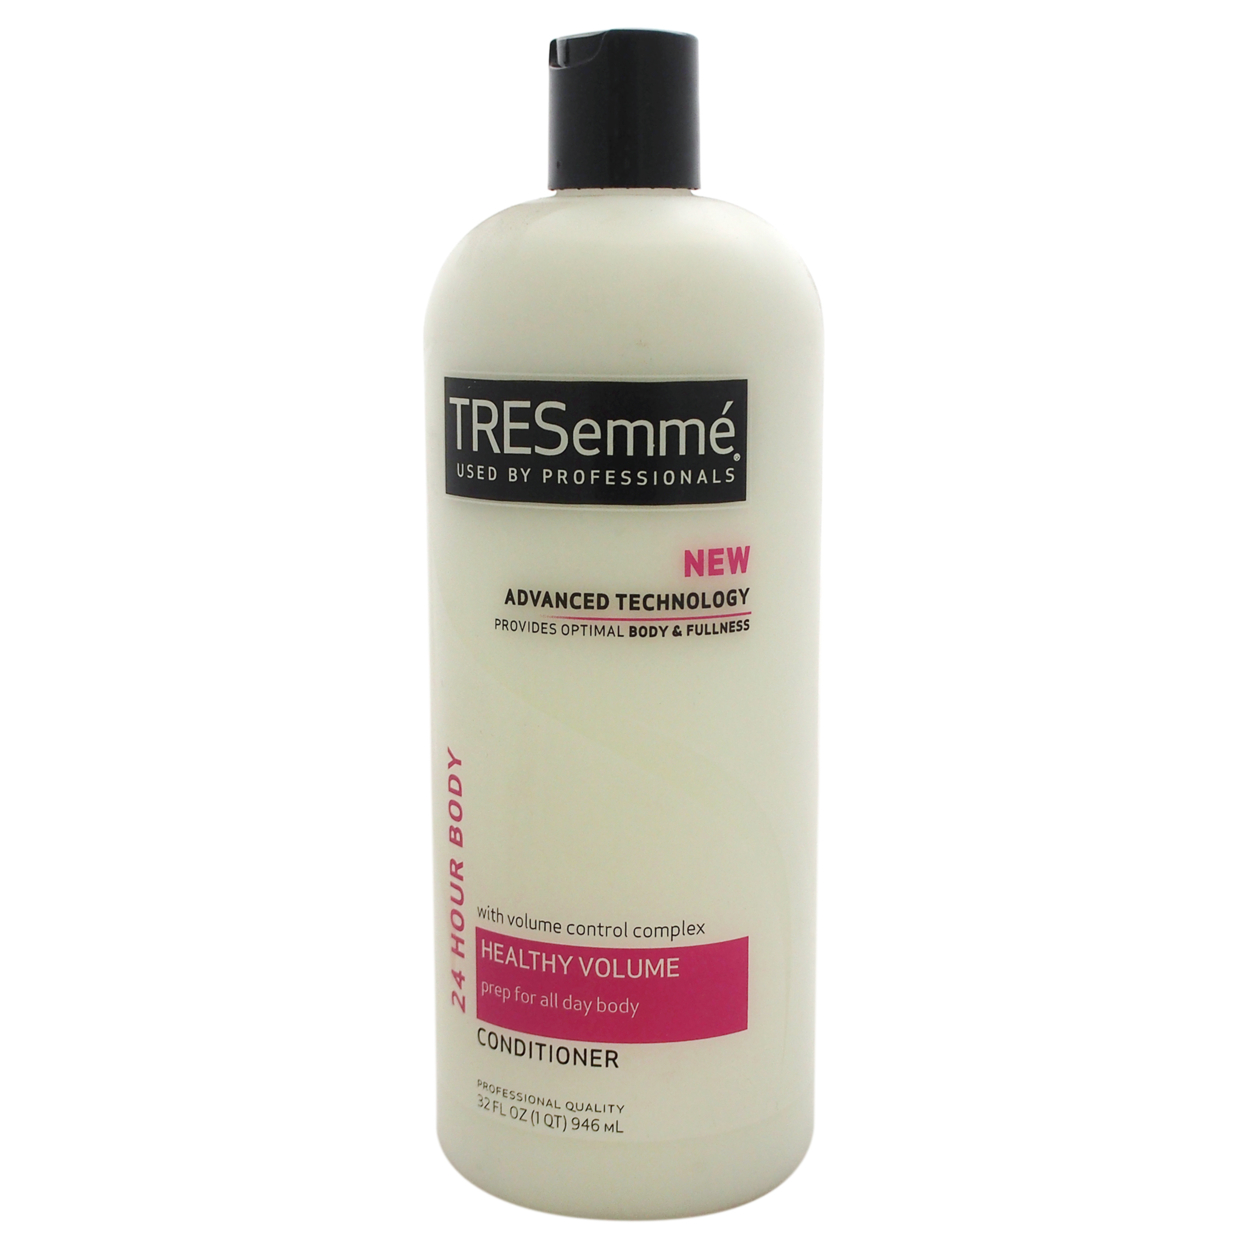 Tresemme 24 Hour Healthy Volume Conditioner, 32 fl oz - image 1 of 2